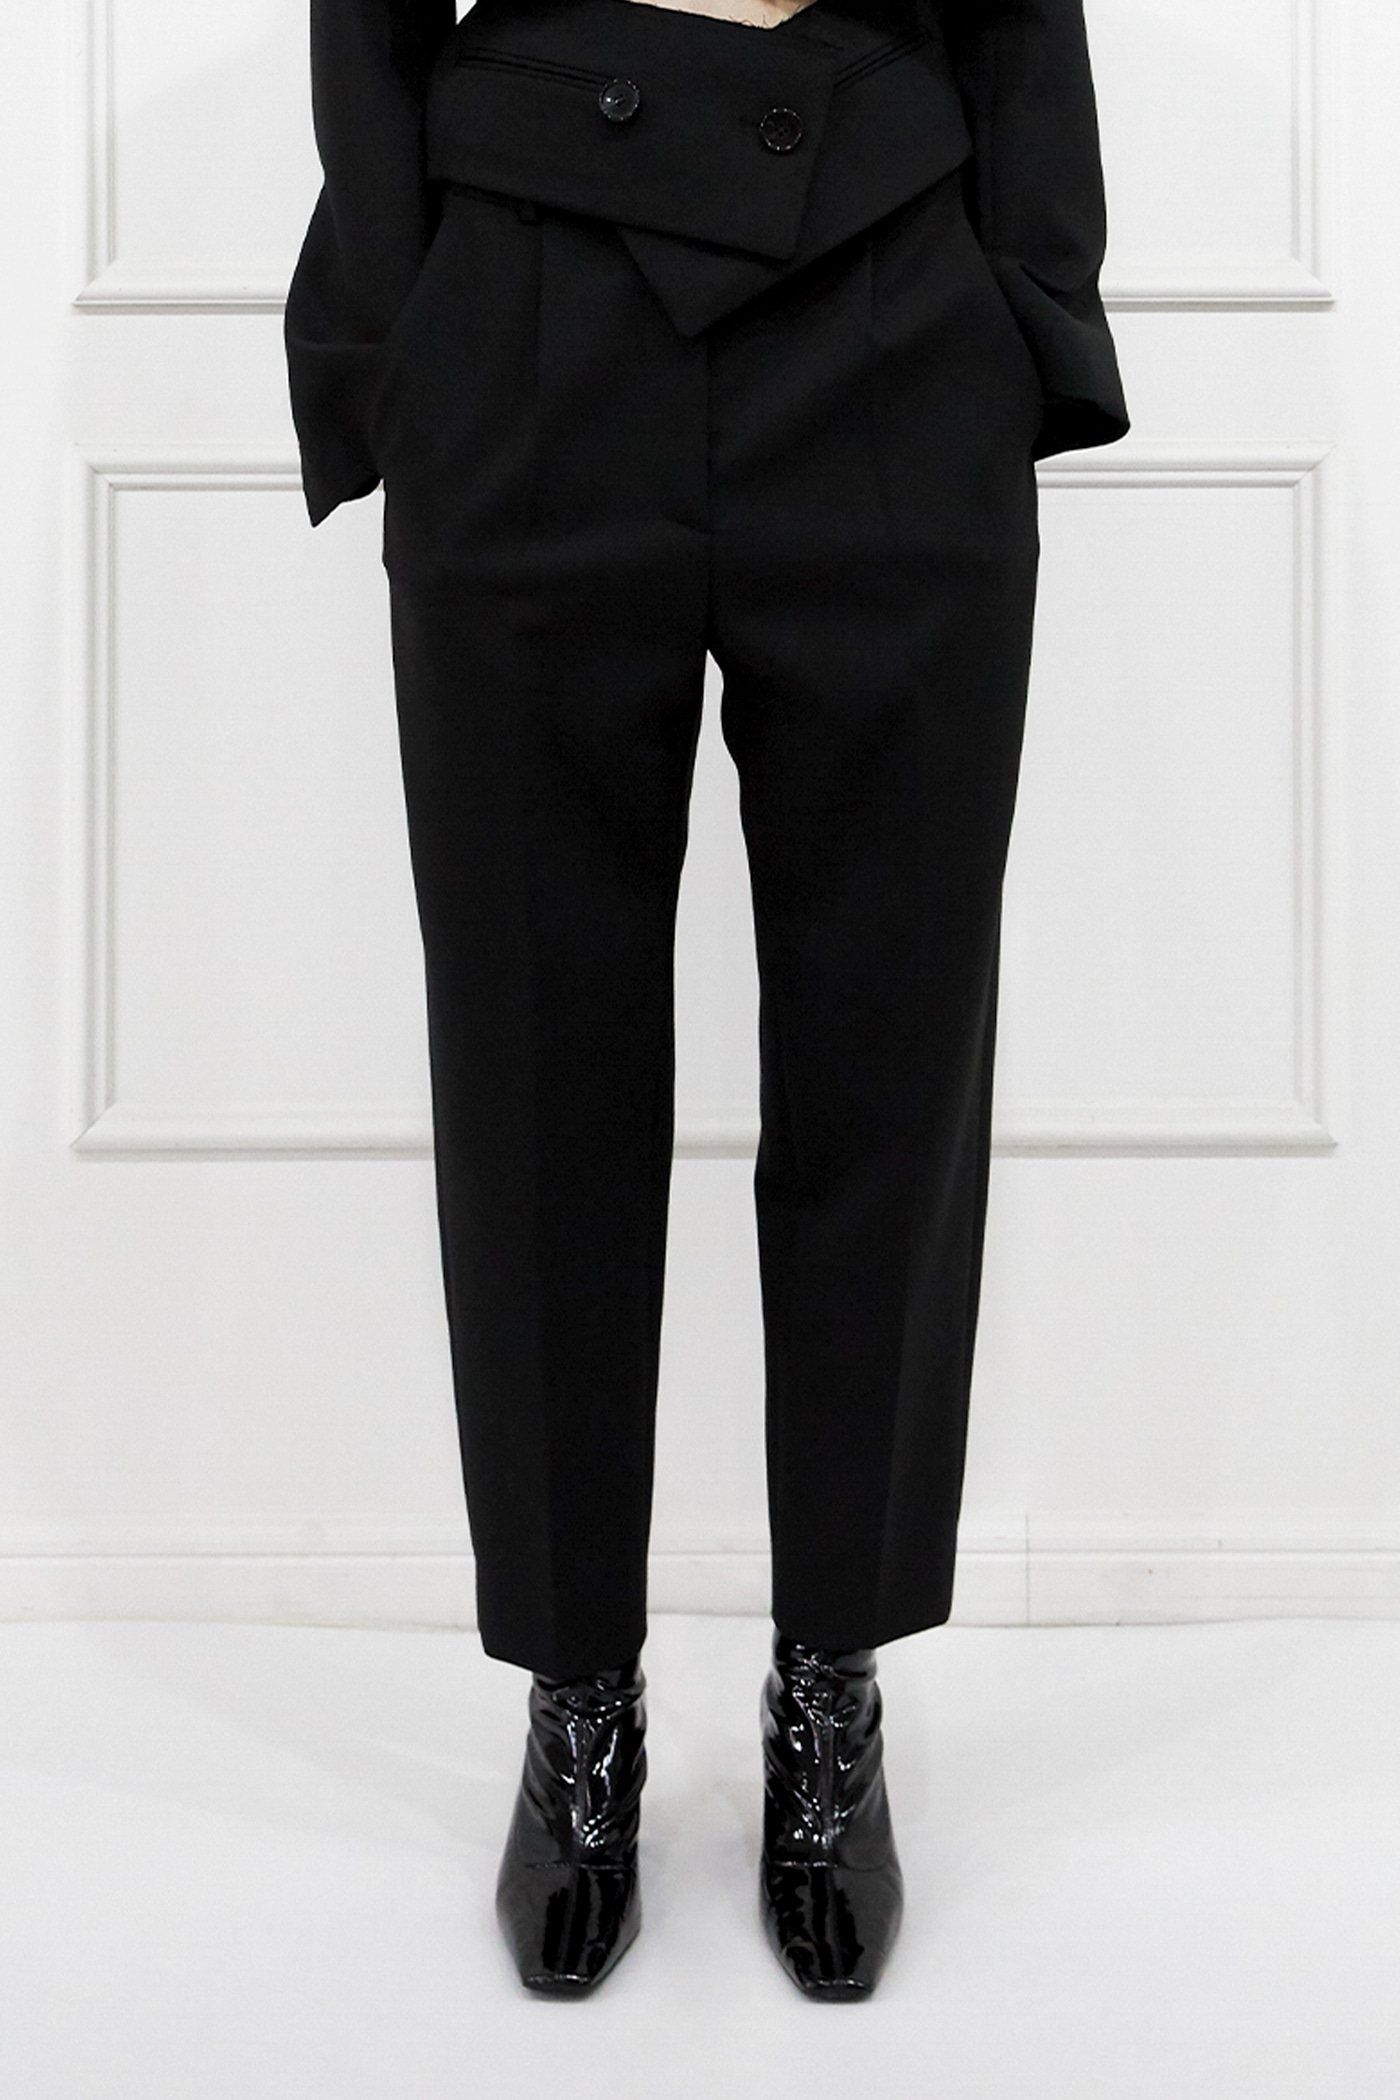 Black Tucked Ankle Trousers_BK